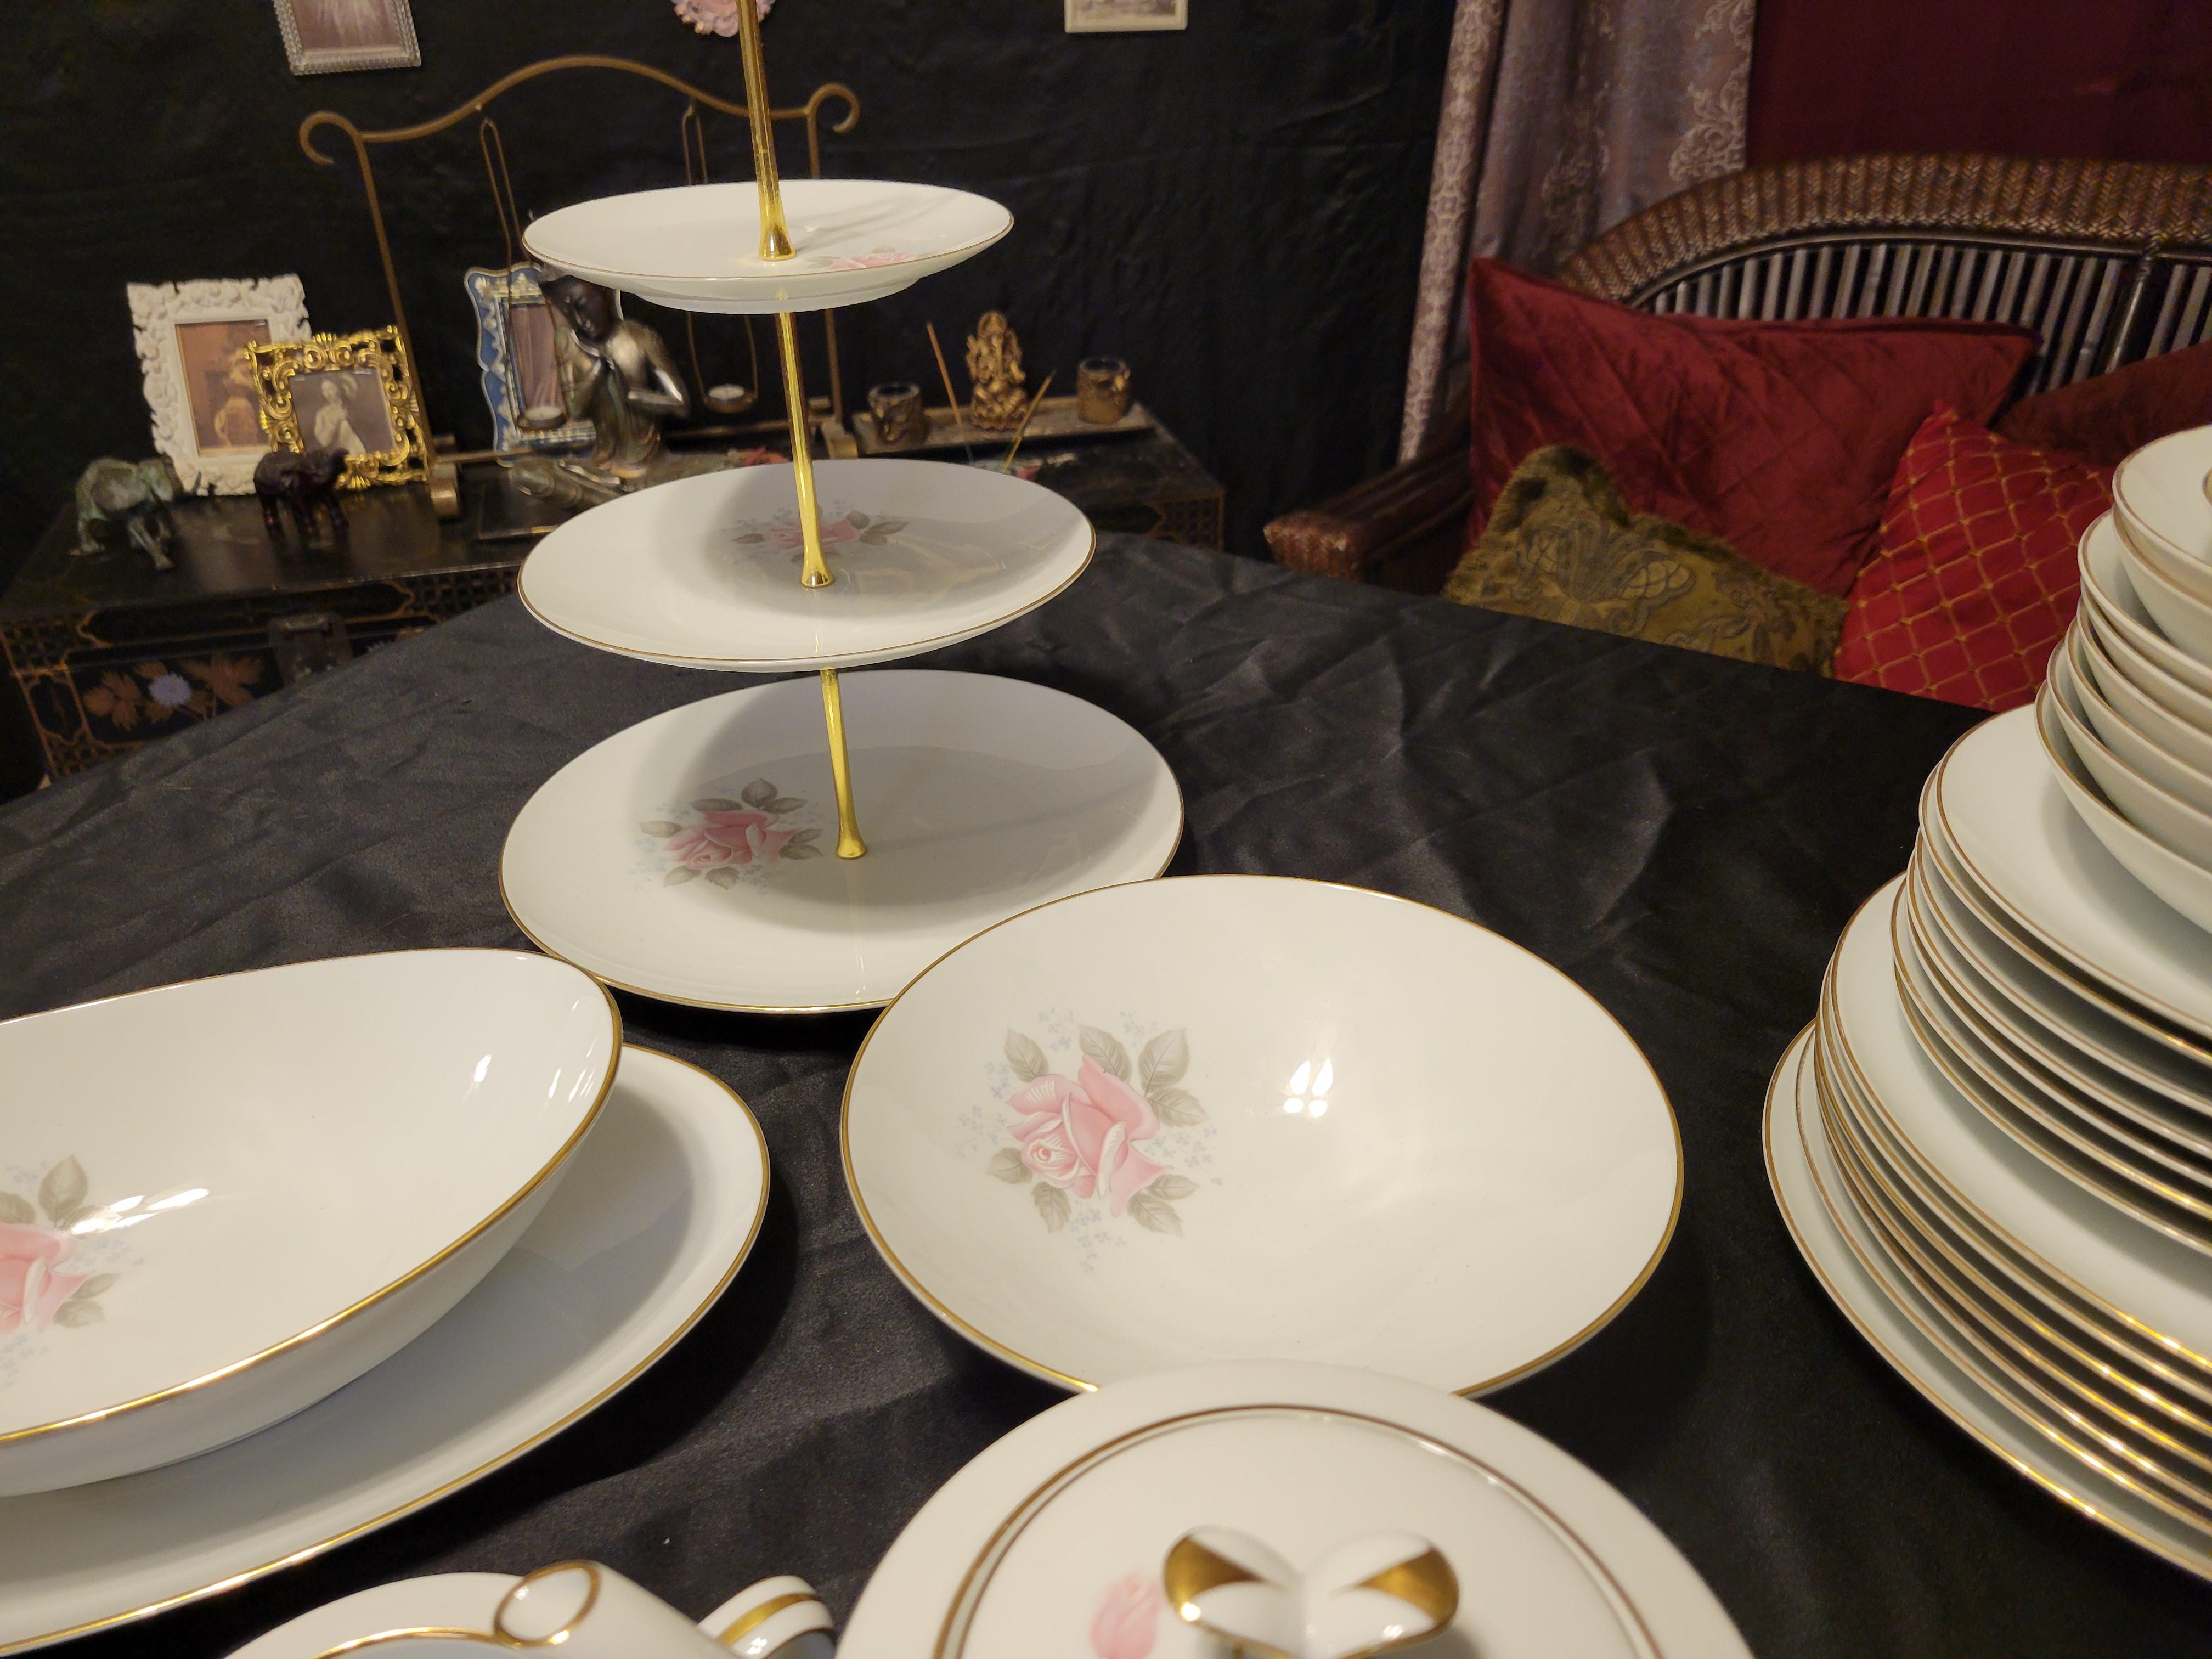 Vintage Noritake 'Roseville' Fine China Dining Set for 8 Persons - 79 Items For Sale 5